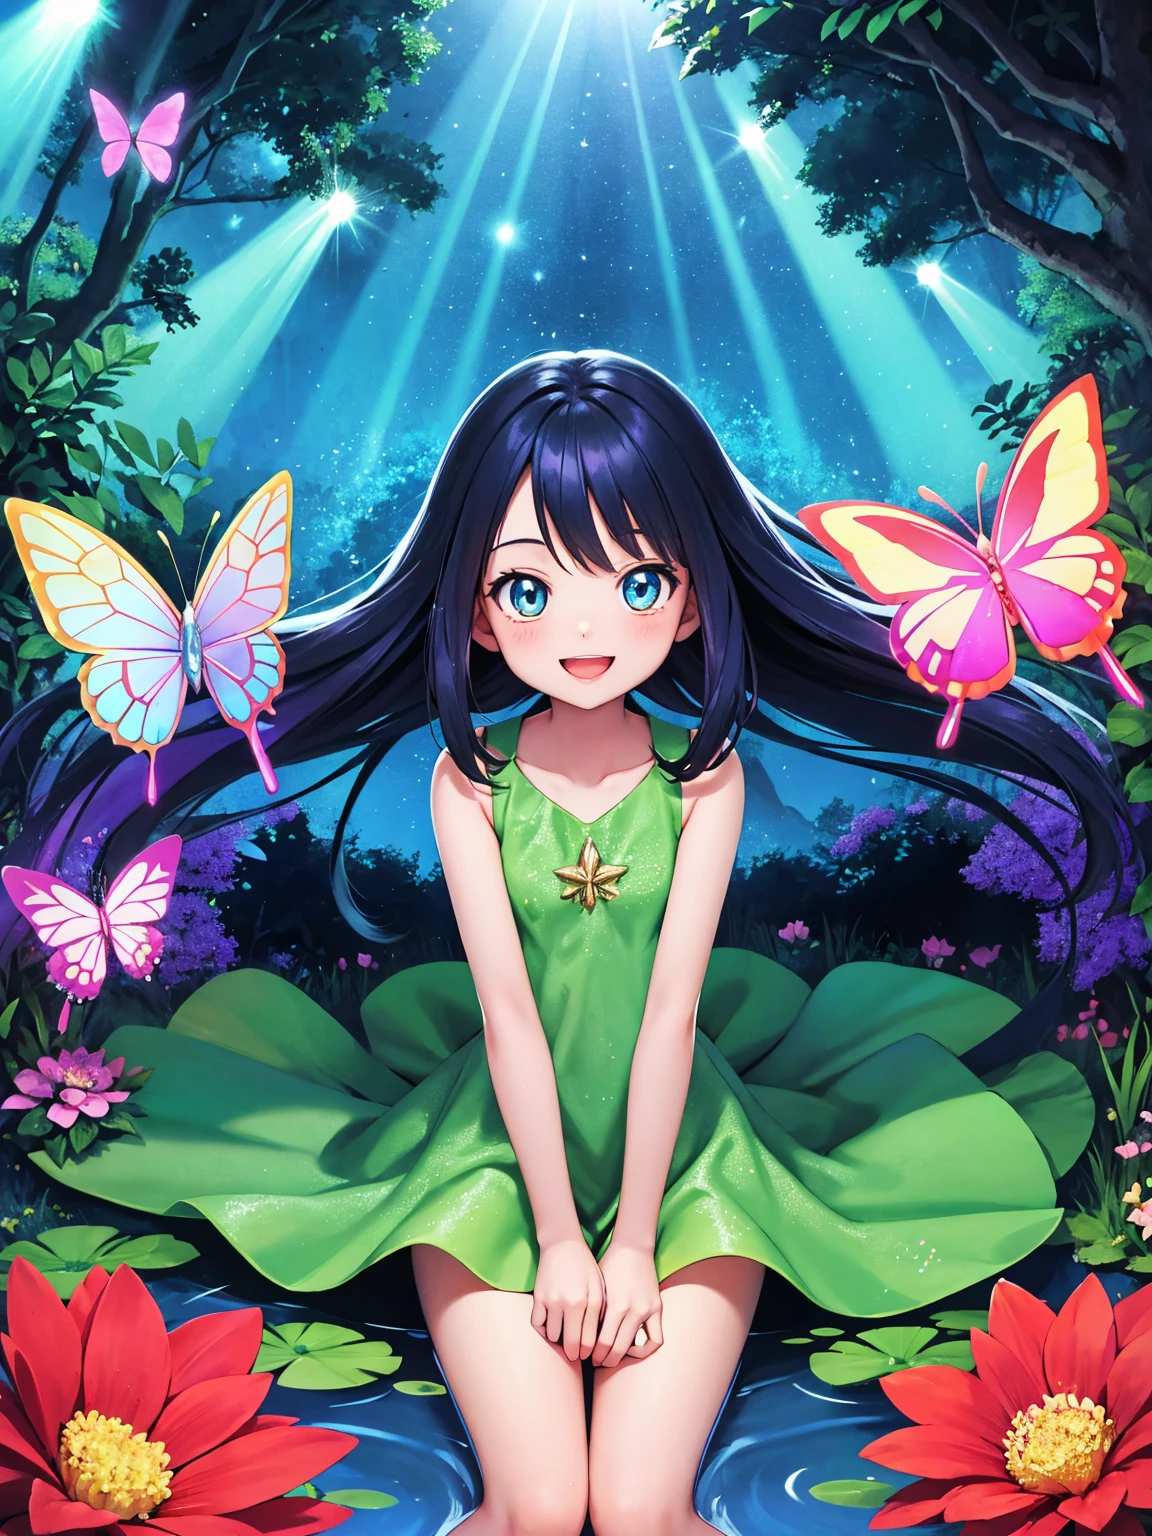 Digimon,having fun,1girl,illustration,colorful,vibrant lights,sparkling,detailed eyes,long hair,bright smile,playful pose,excited expression,towering trees,forest,pond,crystal clear water,butterflies,flowers,bubbly atmosphere,cute companions,fantasy world,magical adventure,best quality,ultra-detailed,portrait,vivid colors,daytime lighting
